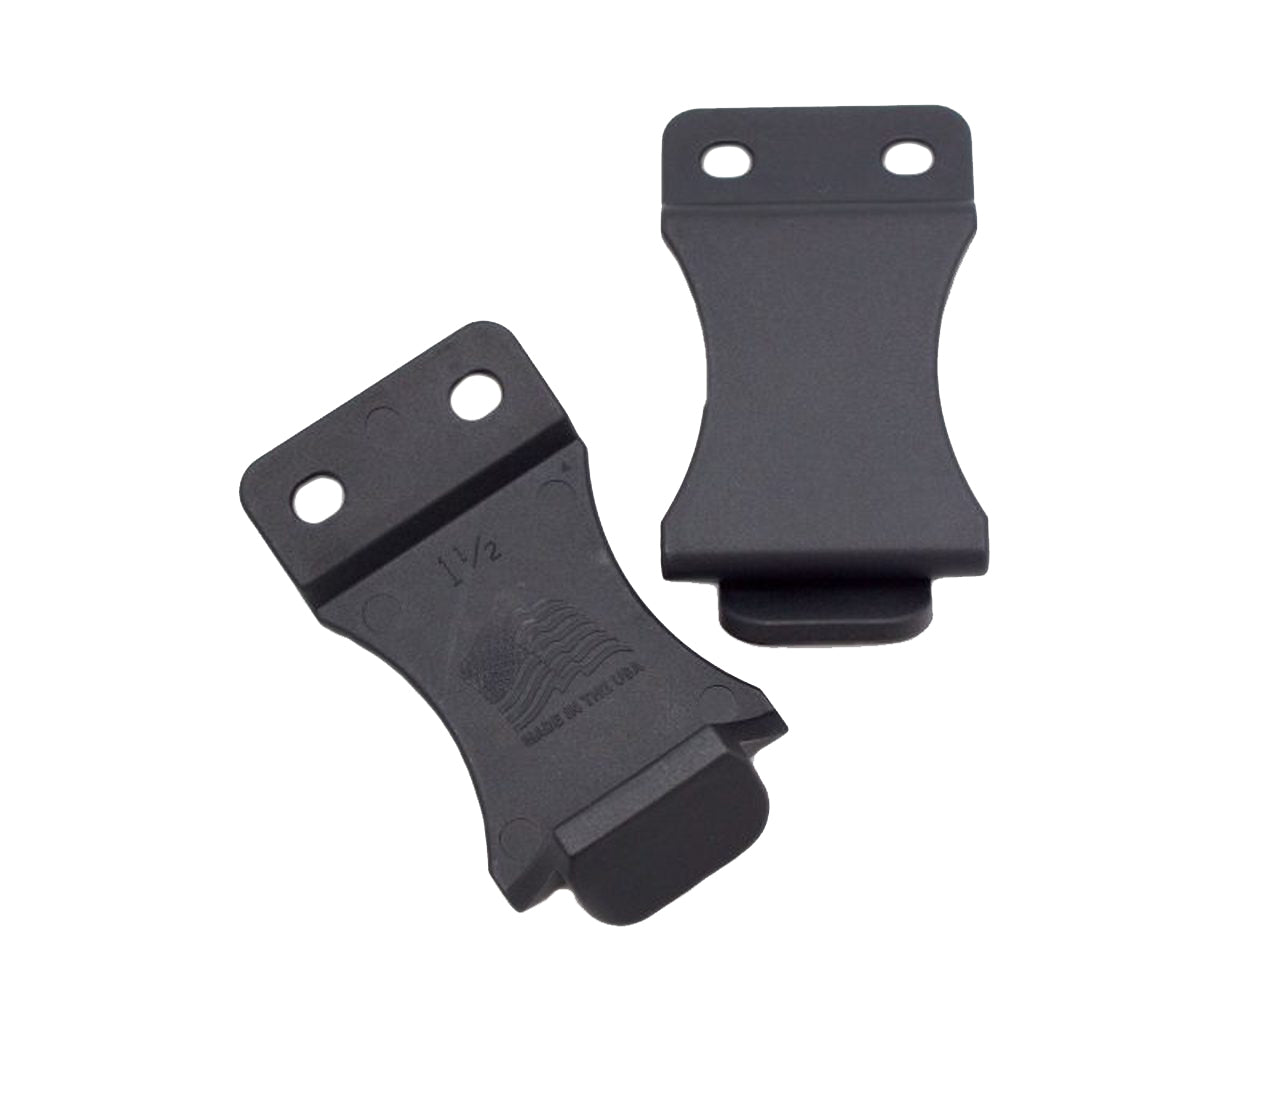  HolsterSmith [2PCS] FOMI Holster Clip for 1.50 Inch